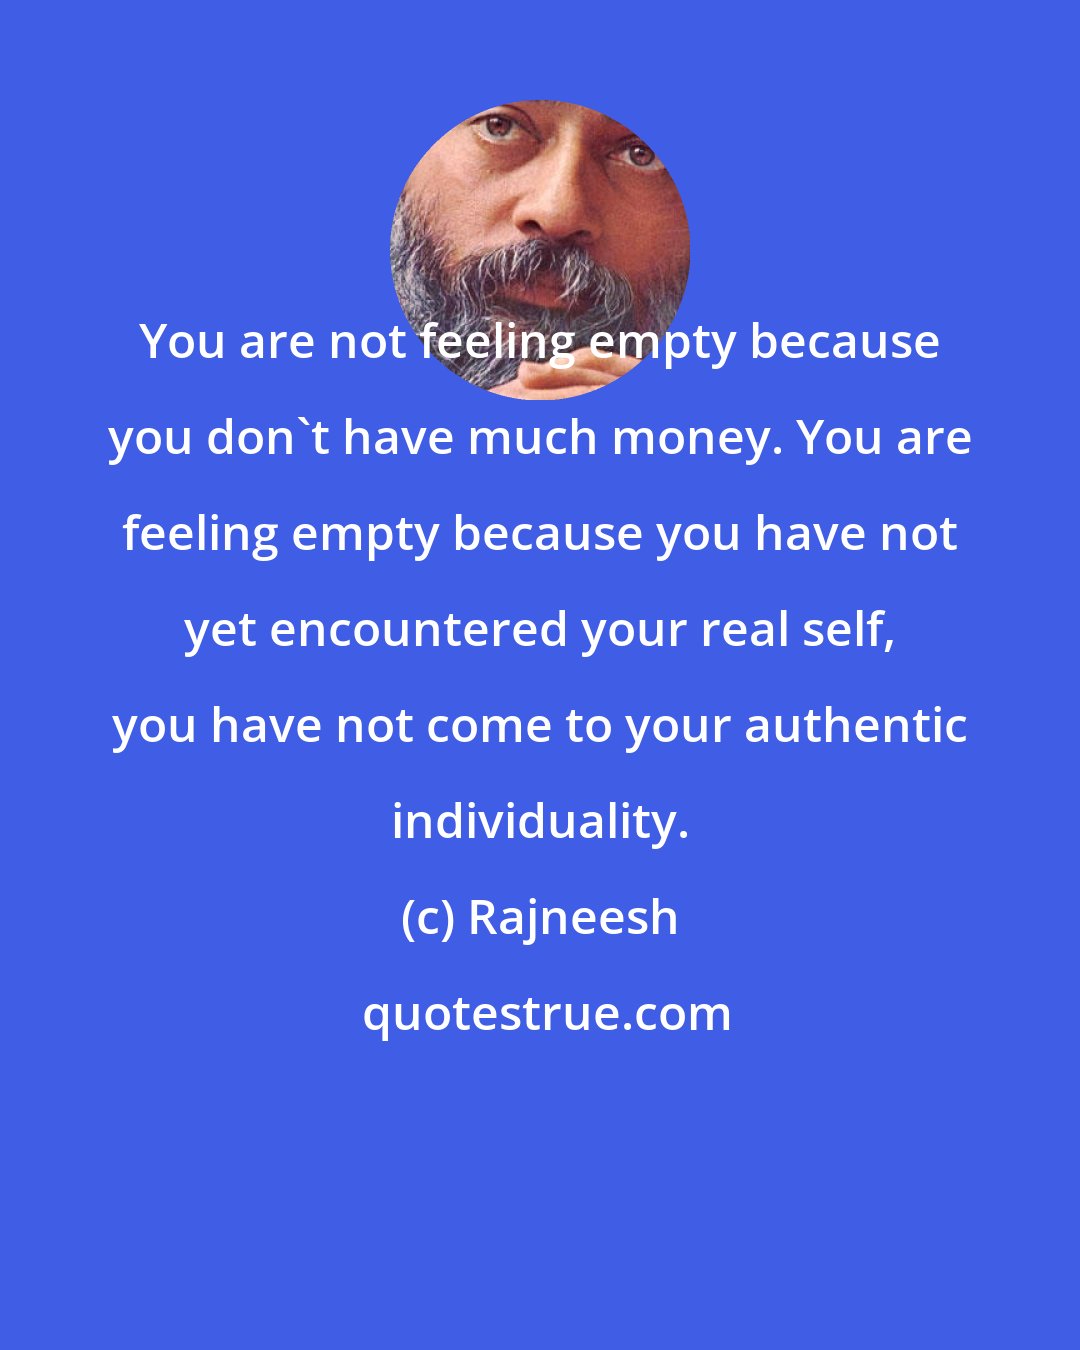 Rajneesh: You are not feeling empty because you don't have much money. You are feeling empty because you have not yet encountered your real self, you have not come to your authentic individuality.